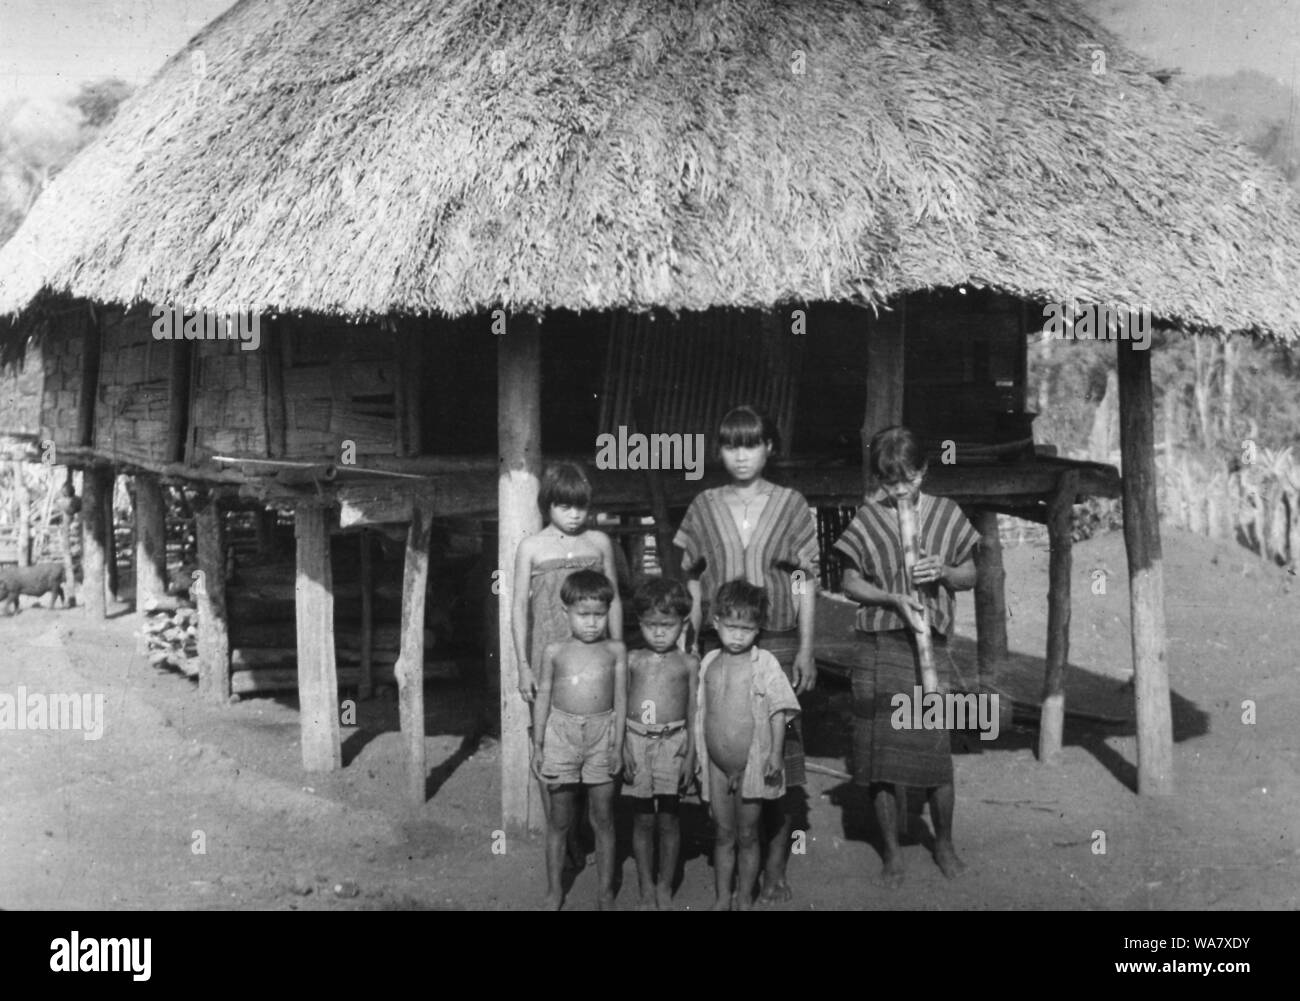 AJAXNETPHOTO. 1953-1957 (APPROX). INDO CHINA. VIETNAM. (IN-COUNTRY LOCATION UNKNOWN.) -  GIRLS, ONE SMOKING A TRADITIONAL BAMBOO WATER PIPE, AND YOUNG BOYS POSE FOR THE CAMERA OUTSIDE THATCHED ROOF HOUSE (HOOCH) ON STILTS. PHOTO:JEAN CORRE/AJAXREF:RX7 191508 243 Stock Photo